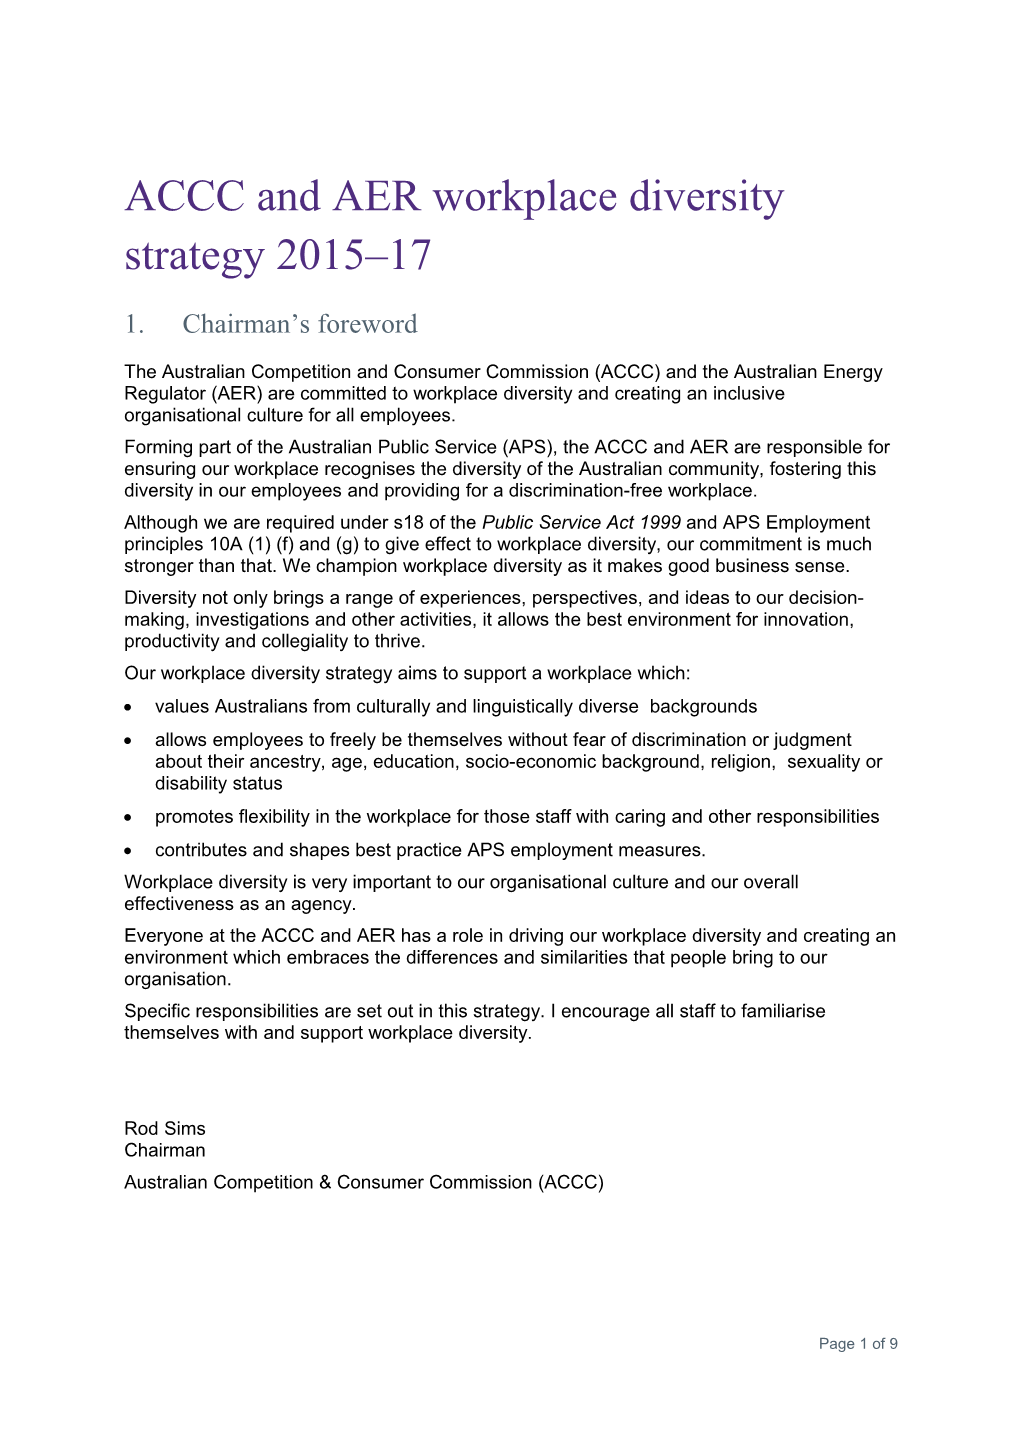 ACCC and AER Workplace Diversity Strategy 2015 17